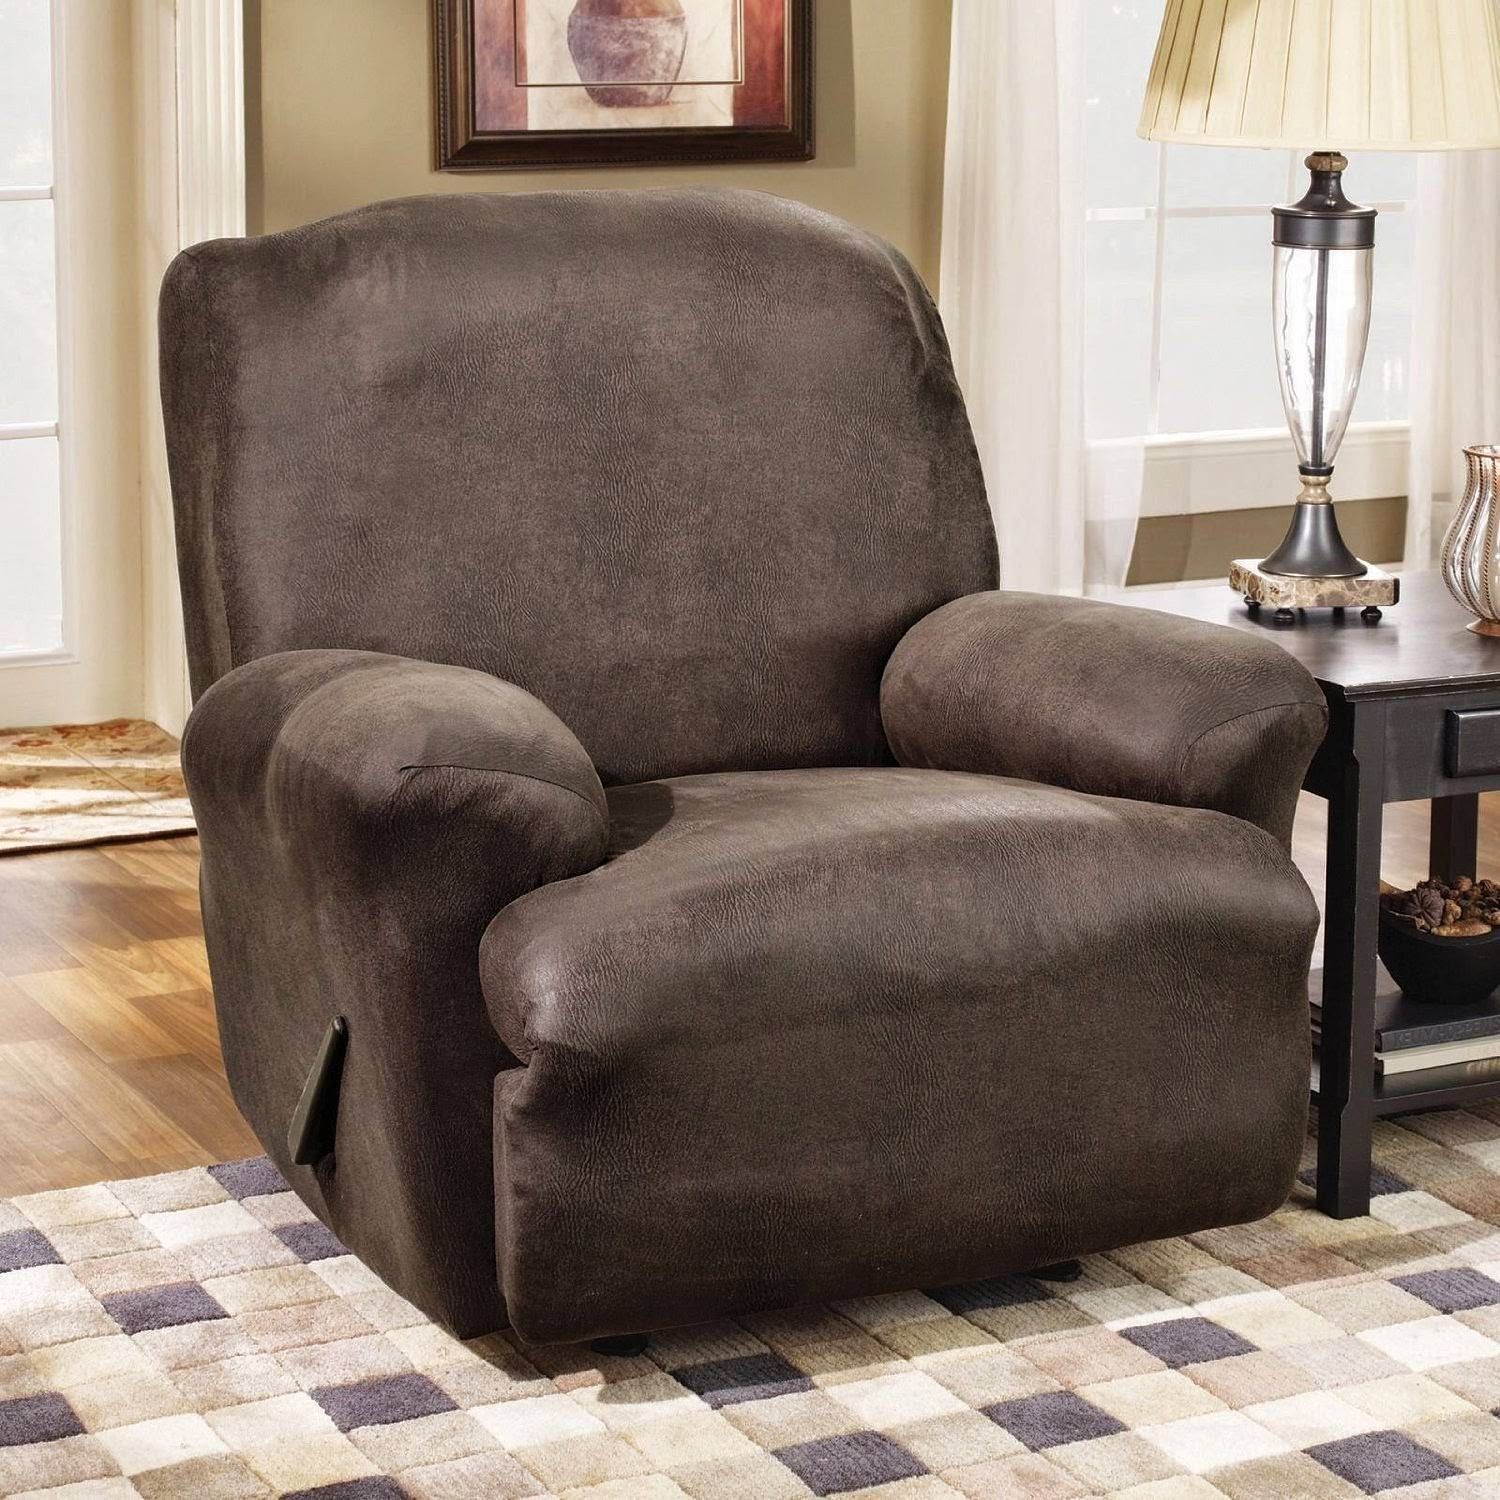 Cheap Recliner Sofas For Sale: Sure Fit Dual Reclining Sofa Couch With Slipcover For Recliner Sofas (View 12 of 15)